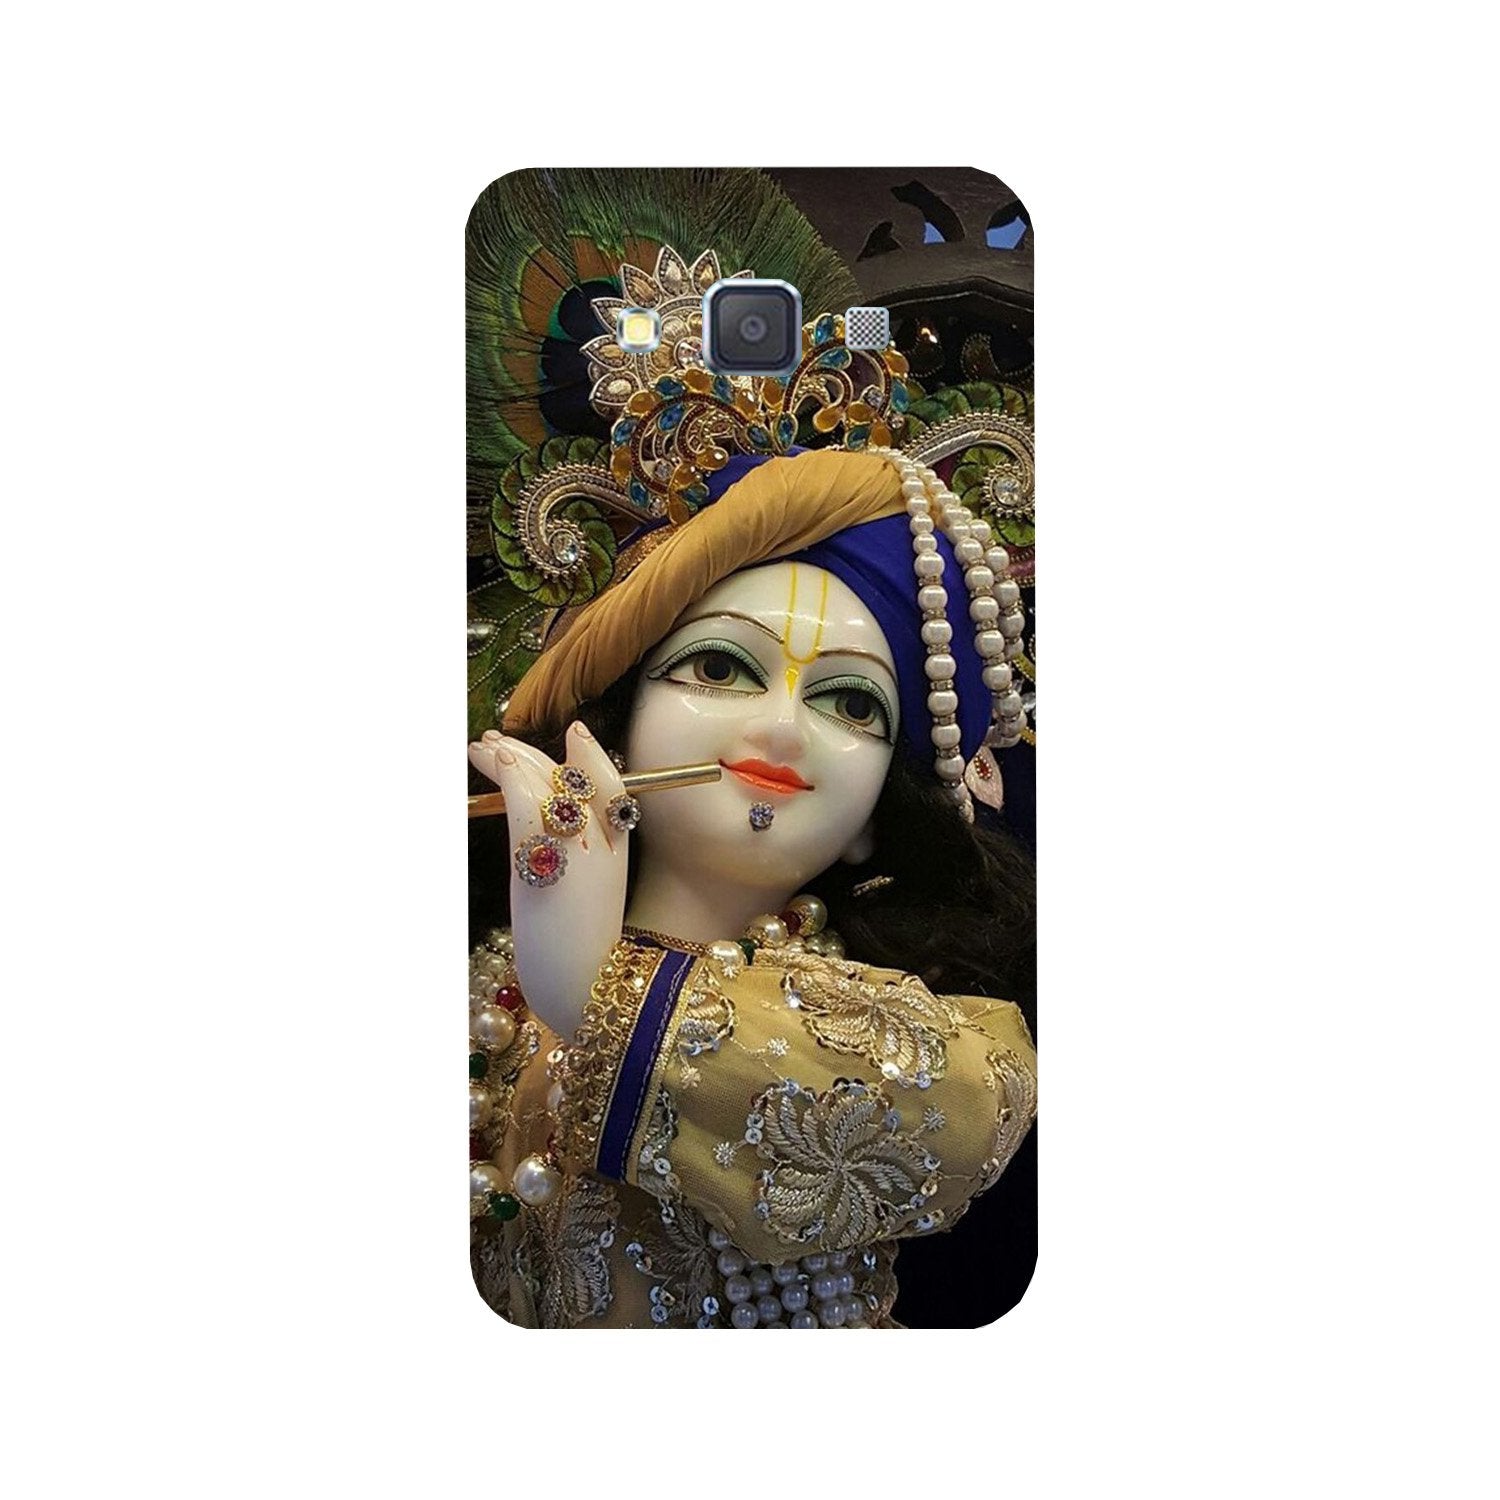 Lord Krishna3 Case for Galaxy ON7/ON7 Pro